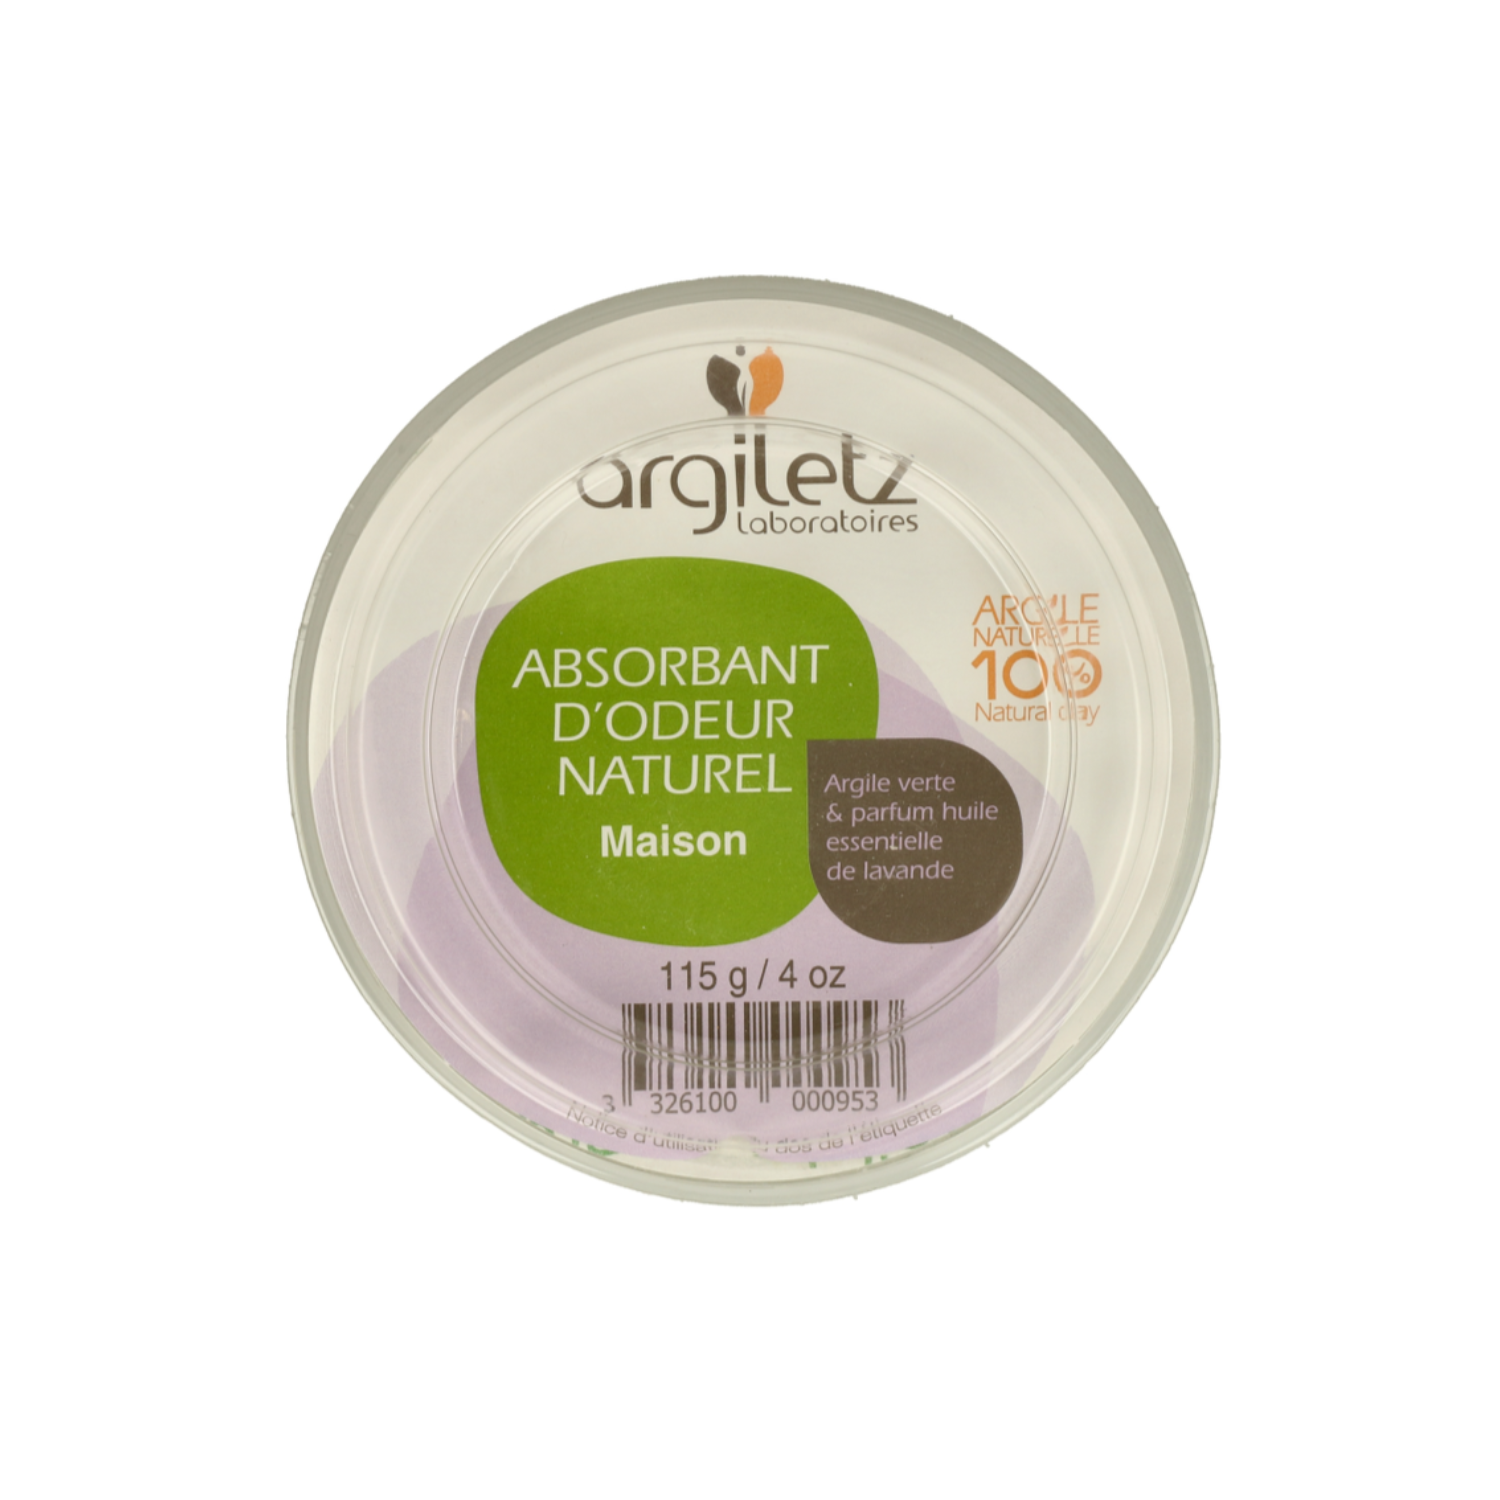 Odour Absorber - Green Clay + Lavender